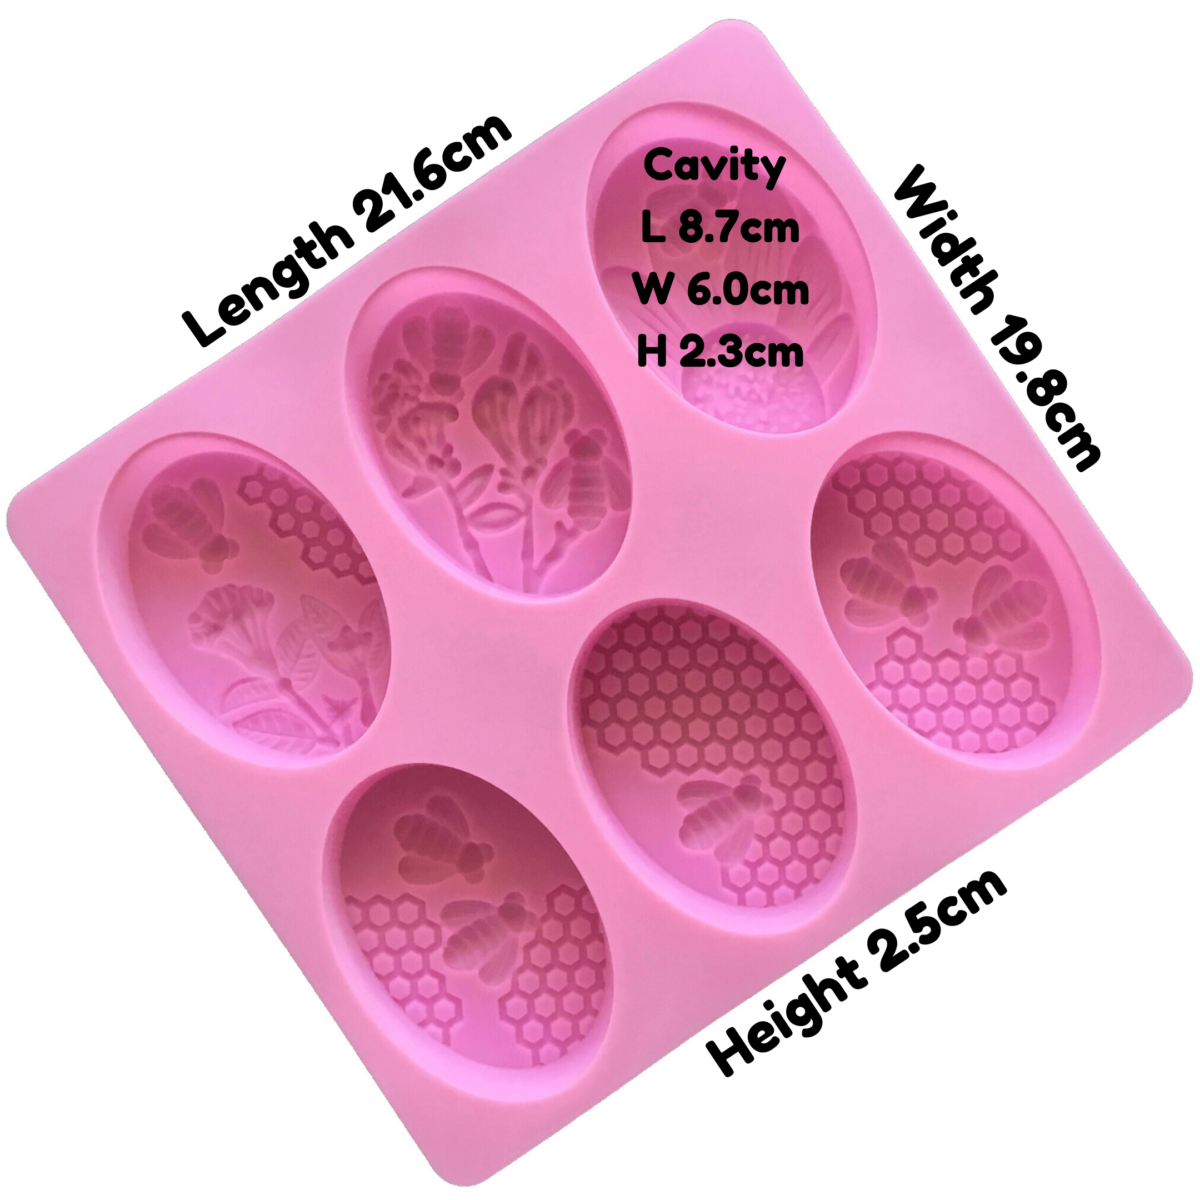 measurements of pink silicone mould with six cavites each with a different honey bee theme